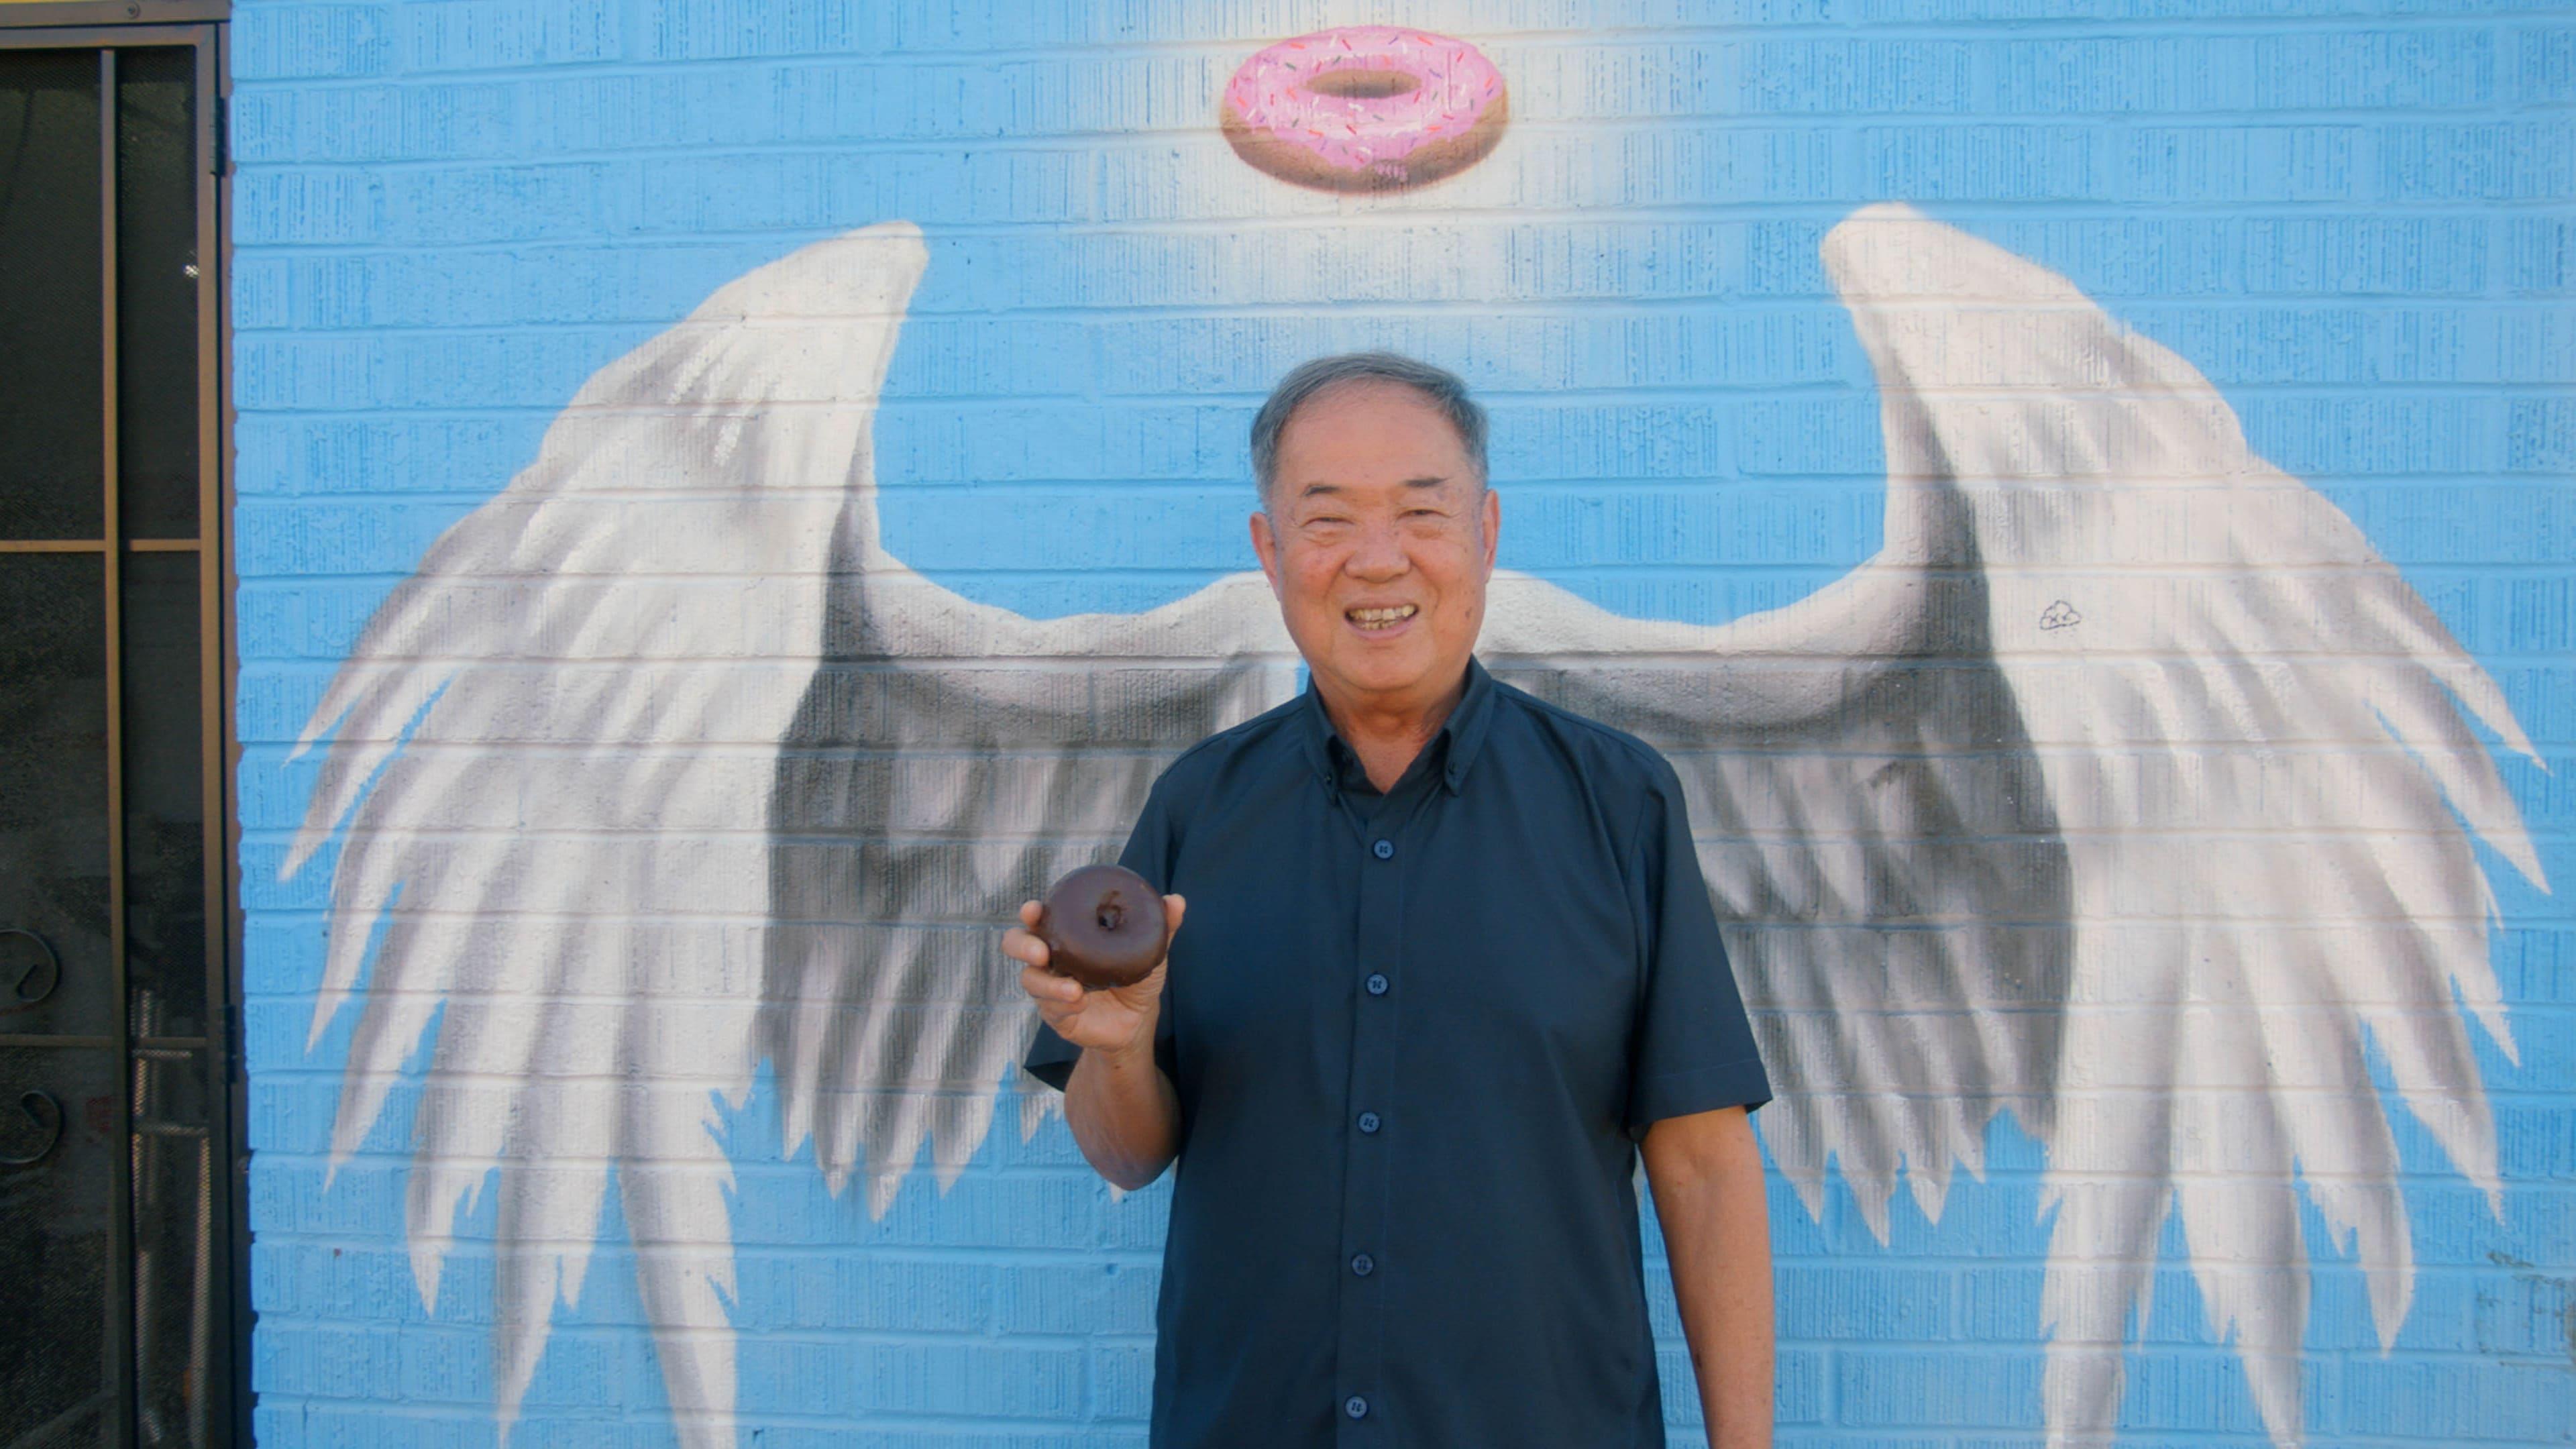 The Donut King backdrop